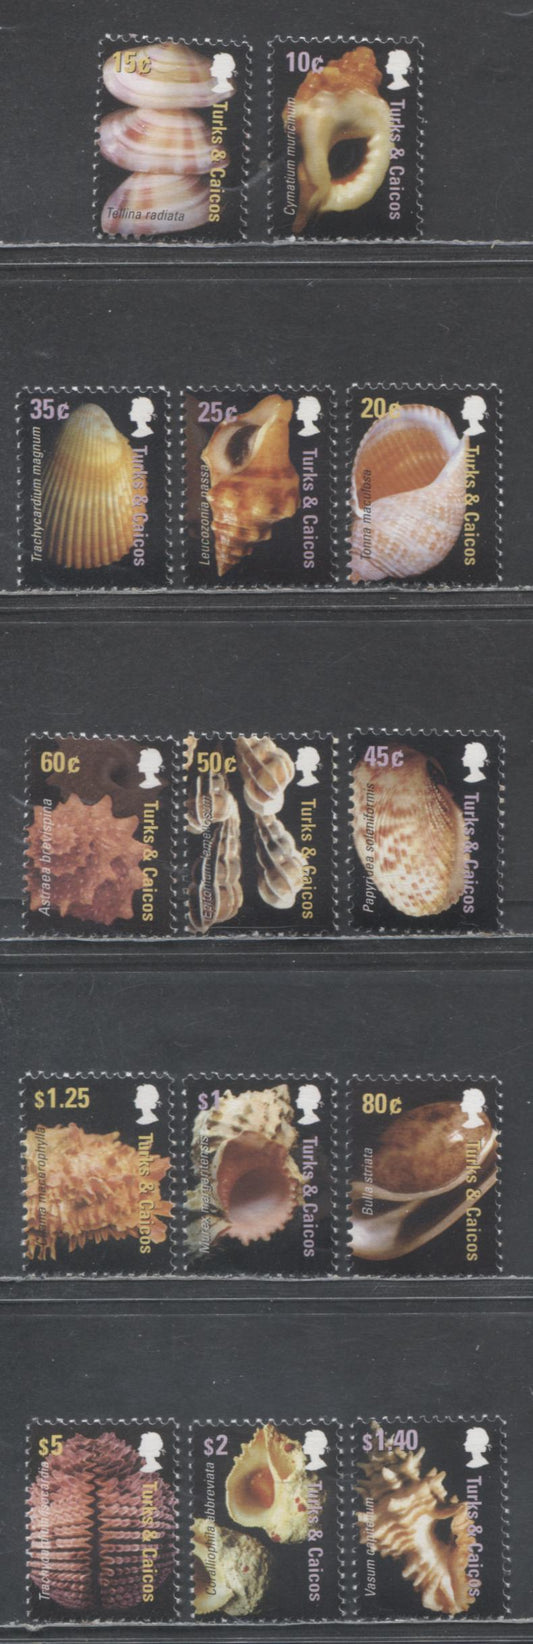 Lot 56 Turks & Caicos SC#1462-1475 2007 Shells Issue, 14 VFNH Singles, Click on Listing to See ALL Pictures, 2017 Scott Cat. $33.8